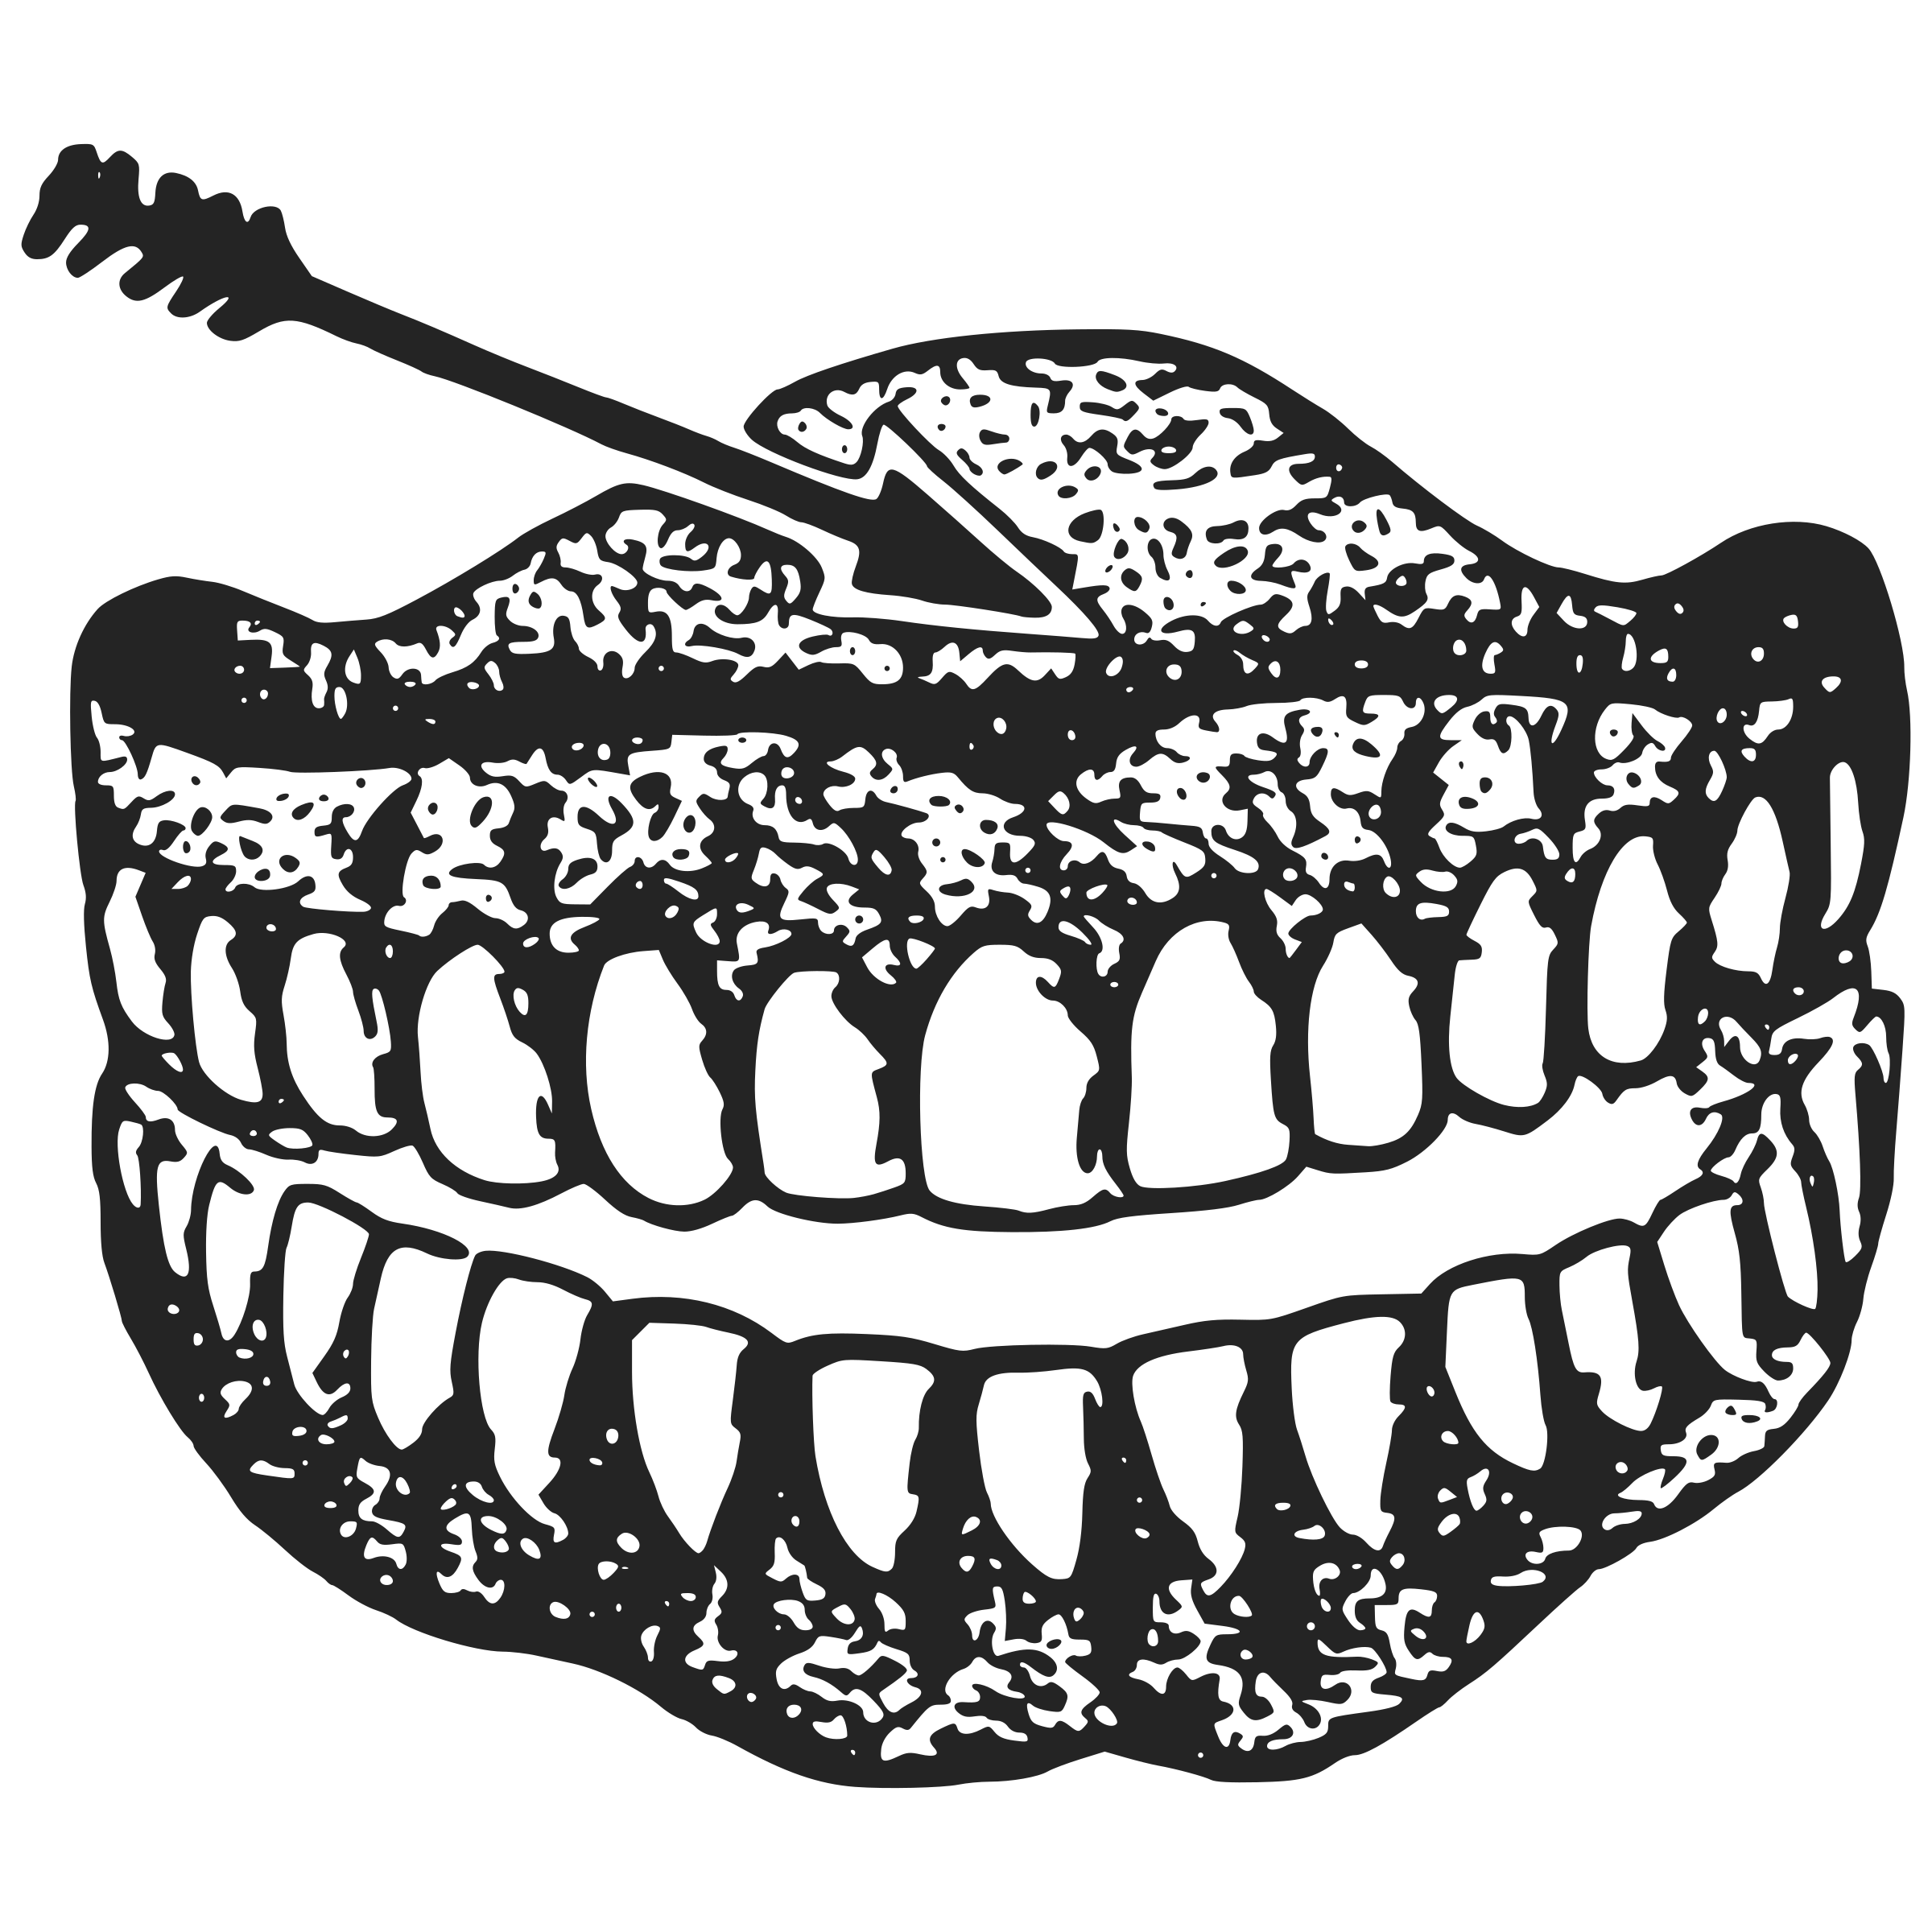 https://openclipart.org/image/2400px/svg_to_png/220592/Dentures-1911.png